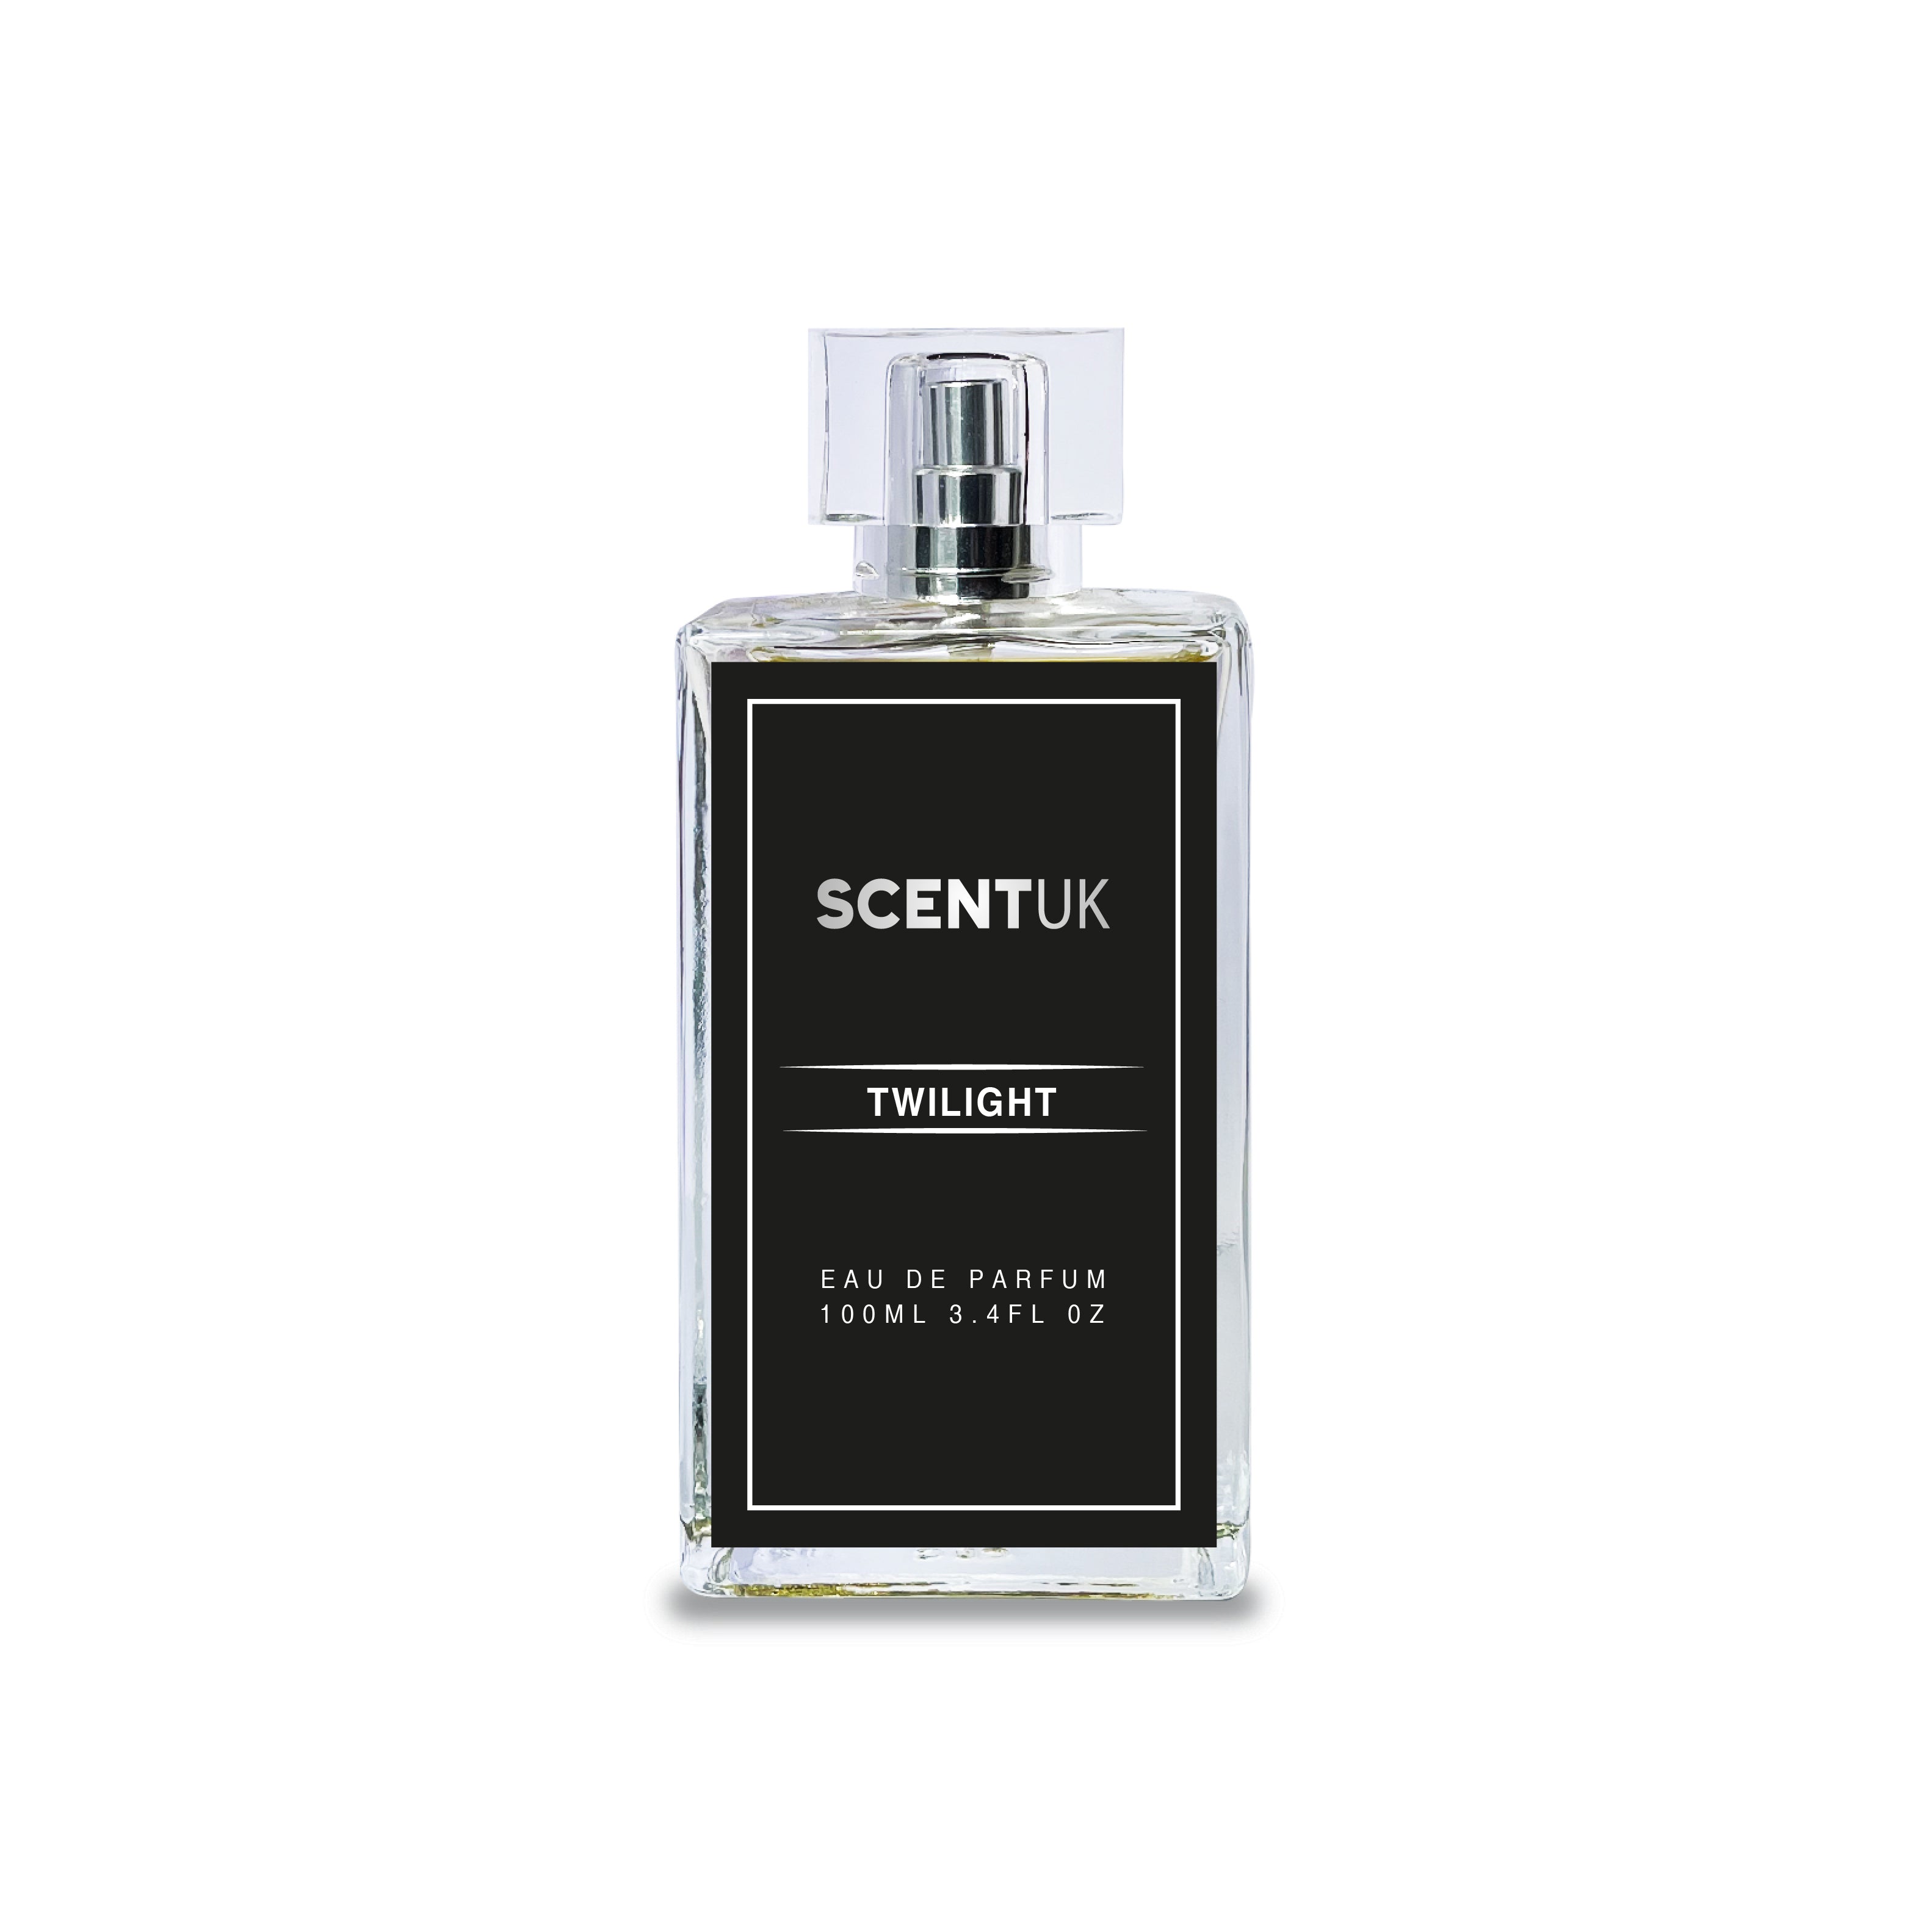 Inspired by Ombre Nomade - 171 - GF Scents